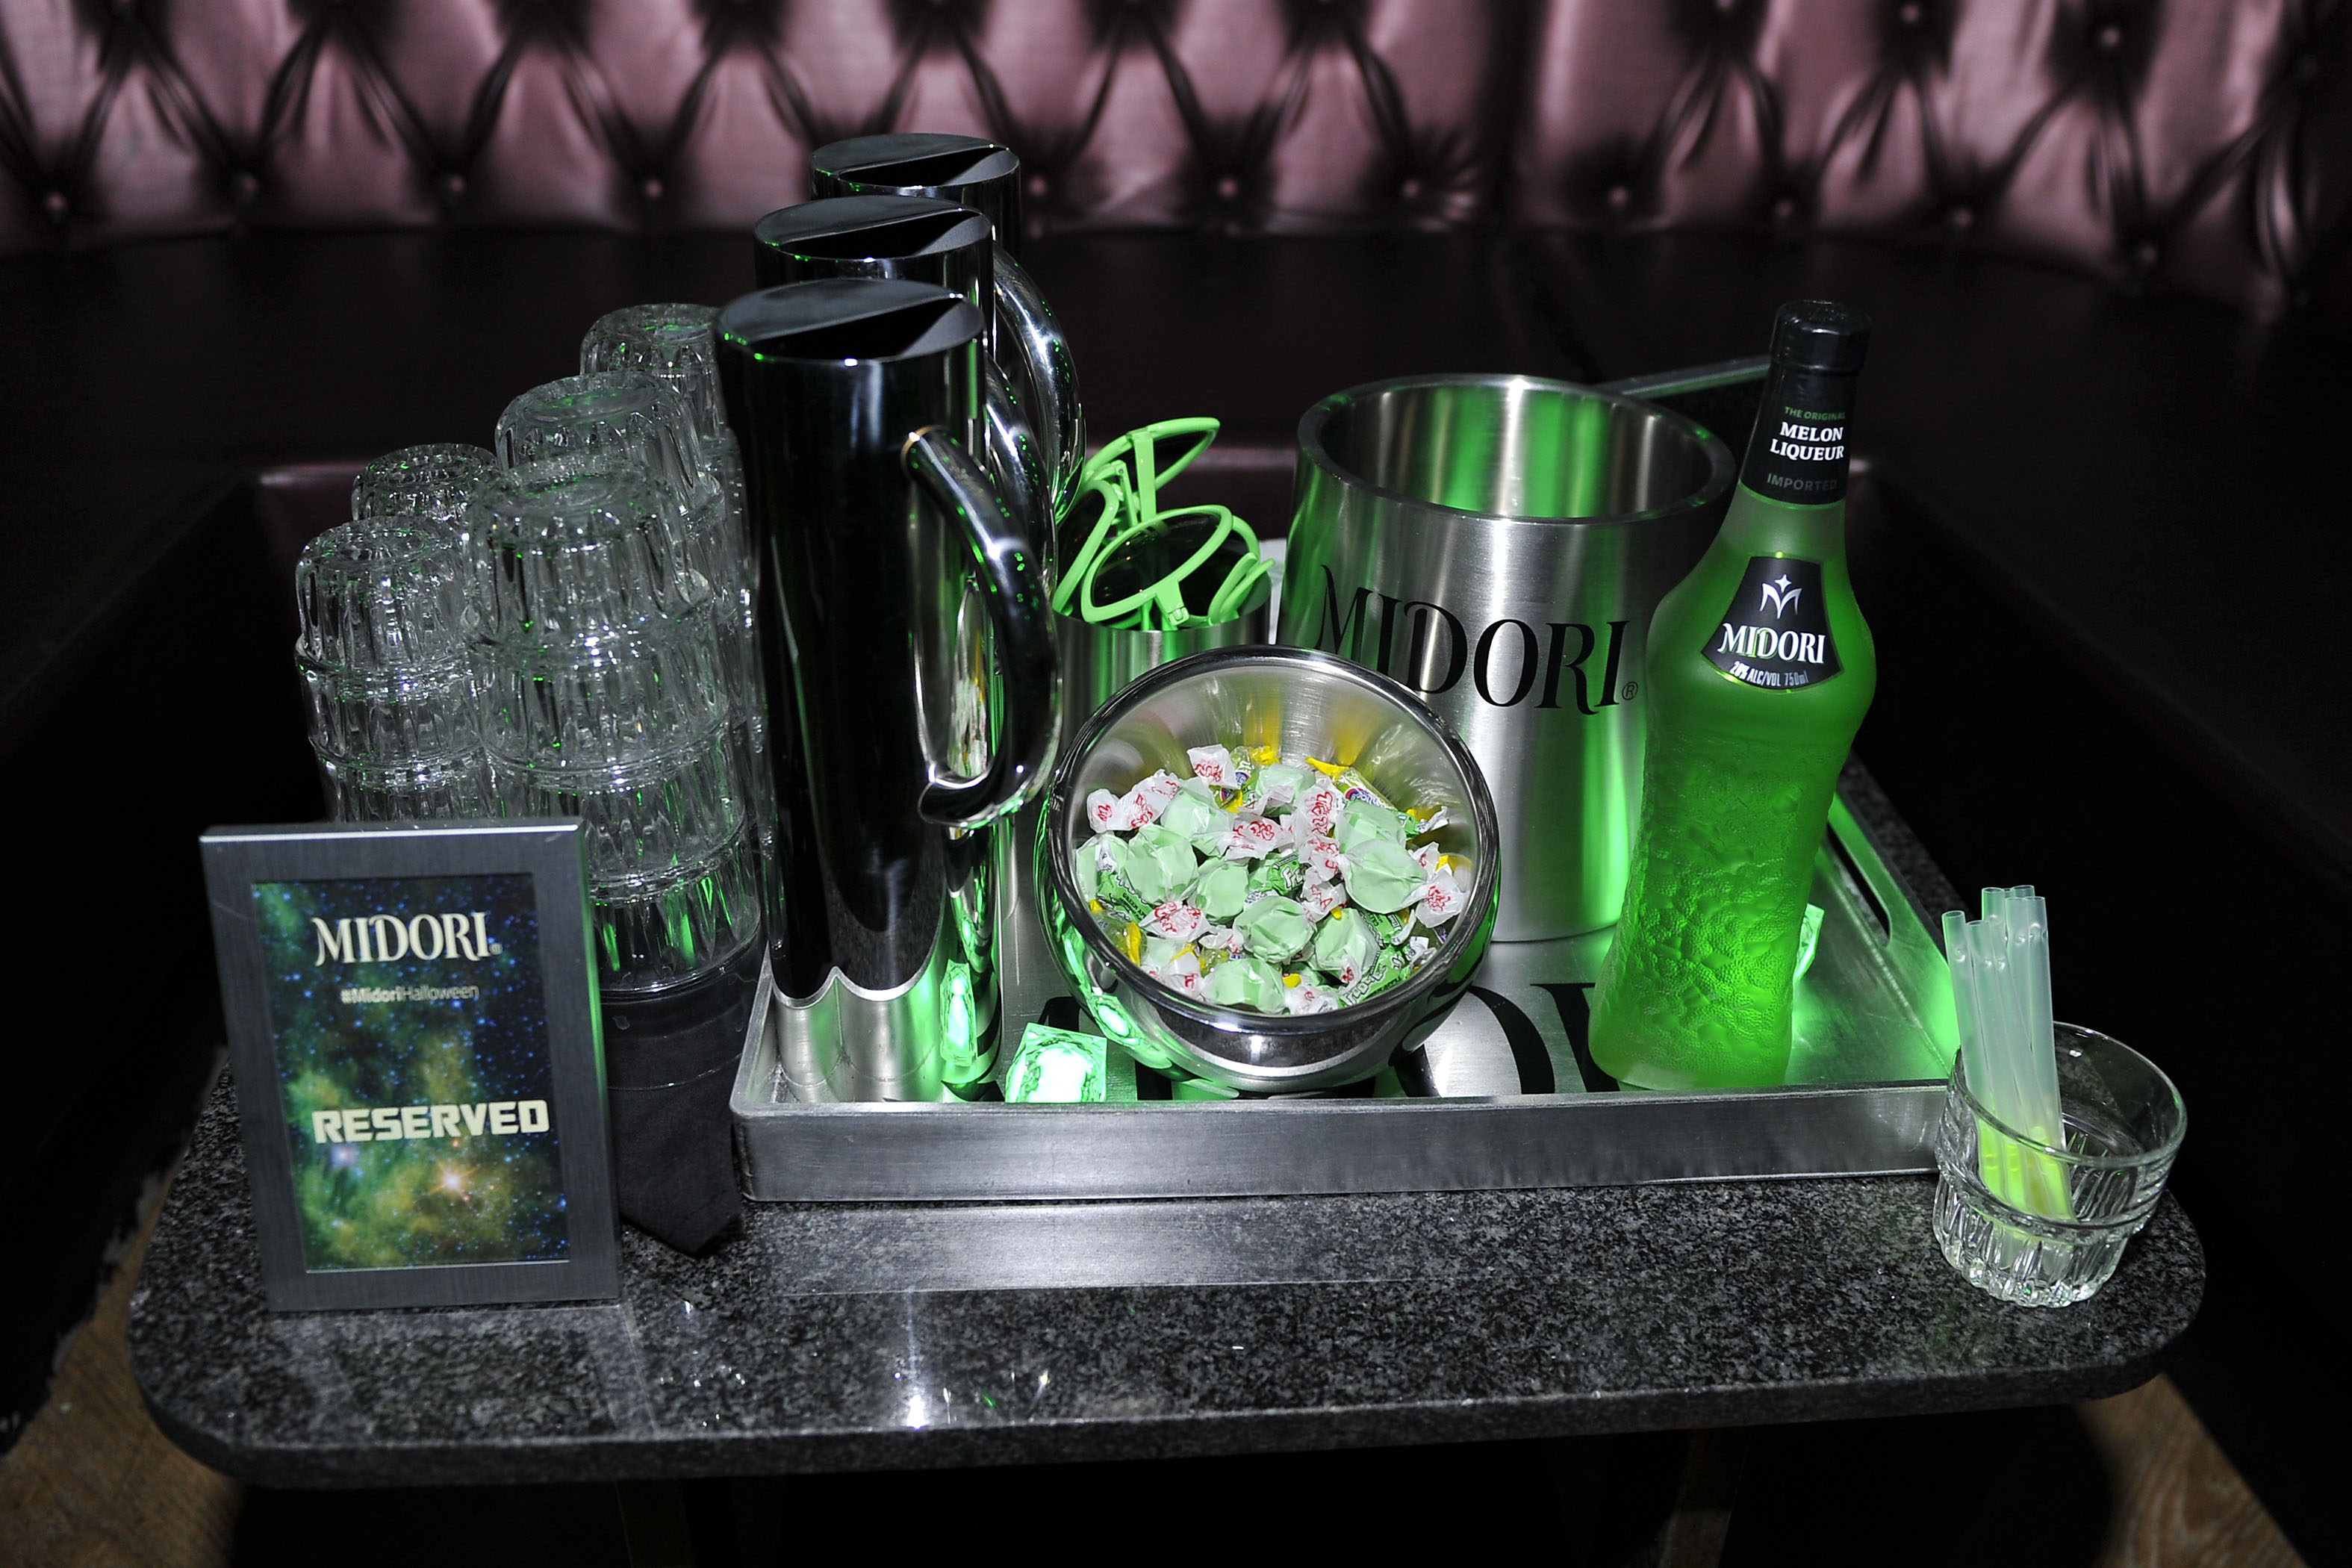 3rd Annual Midori Green Halloween Event at Bootsy Bellows in LA